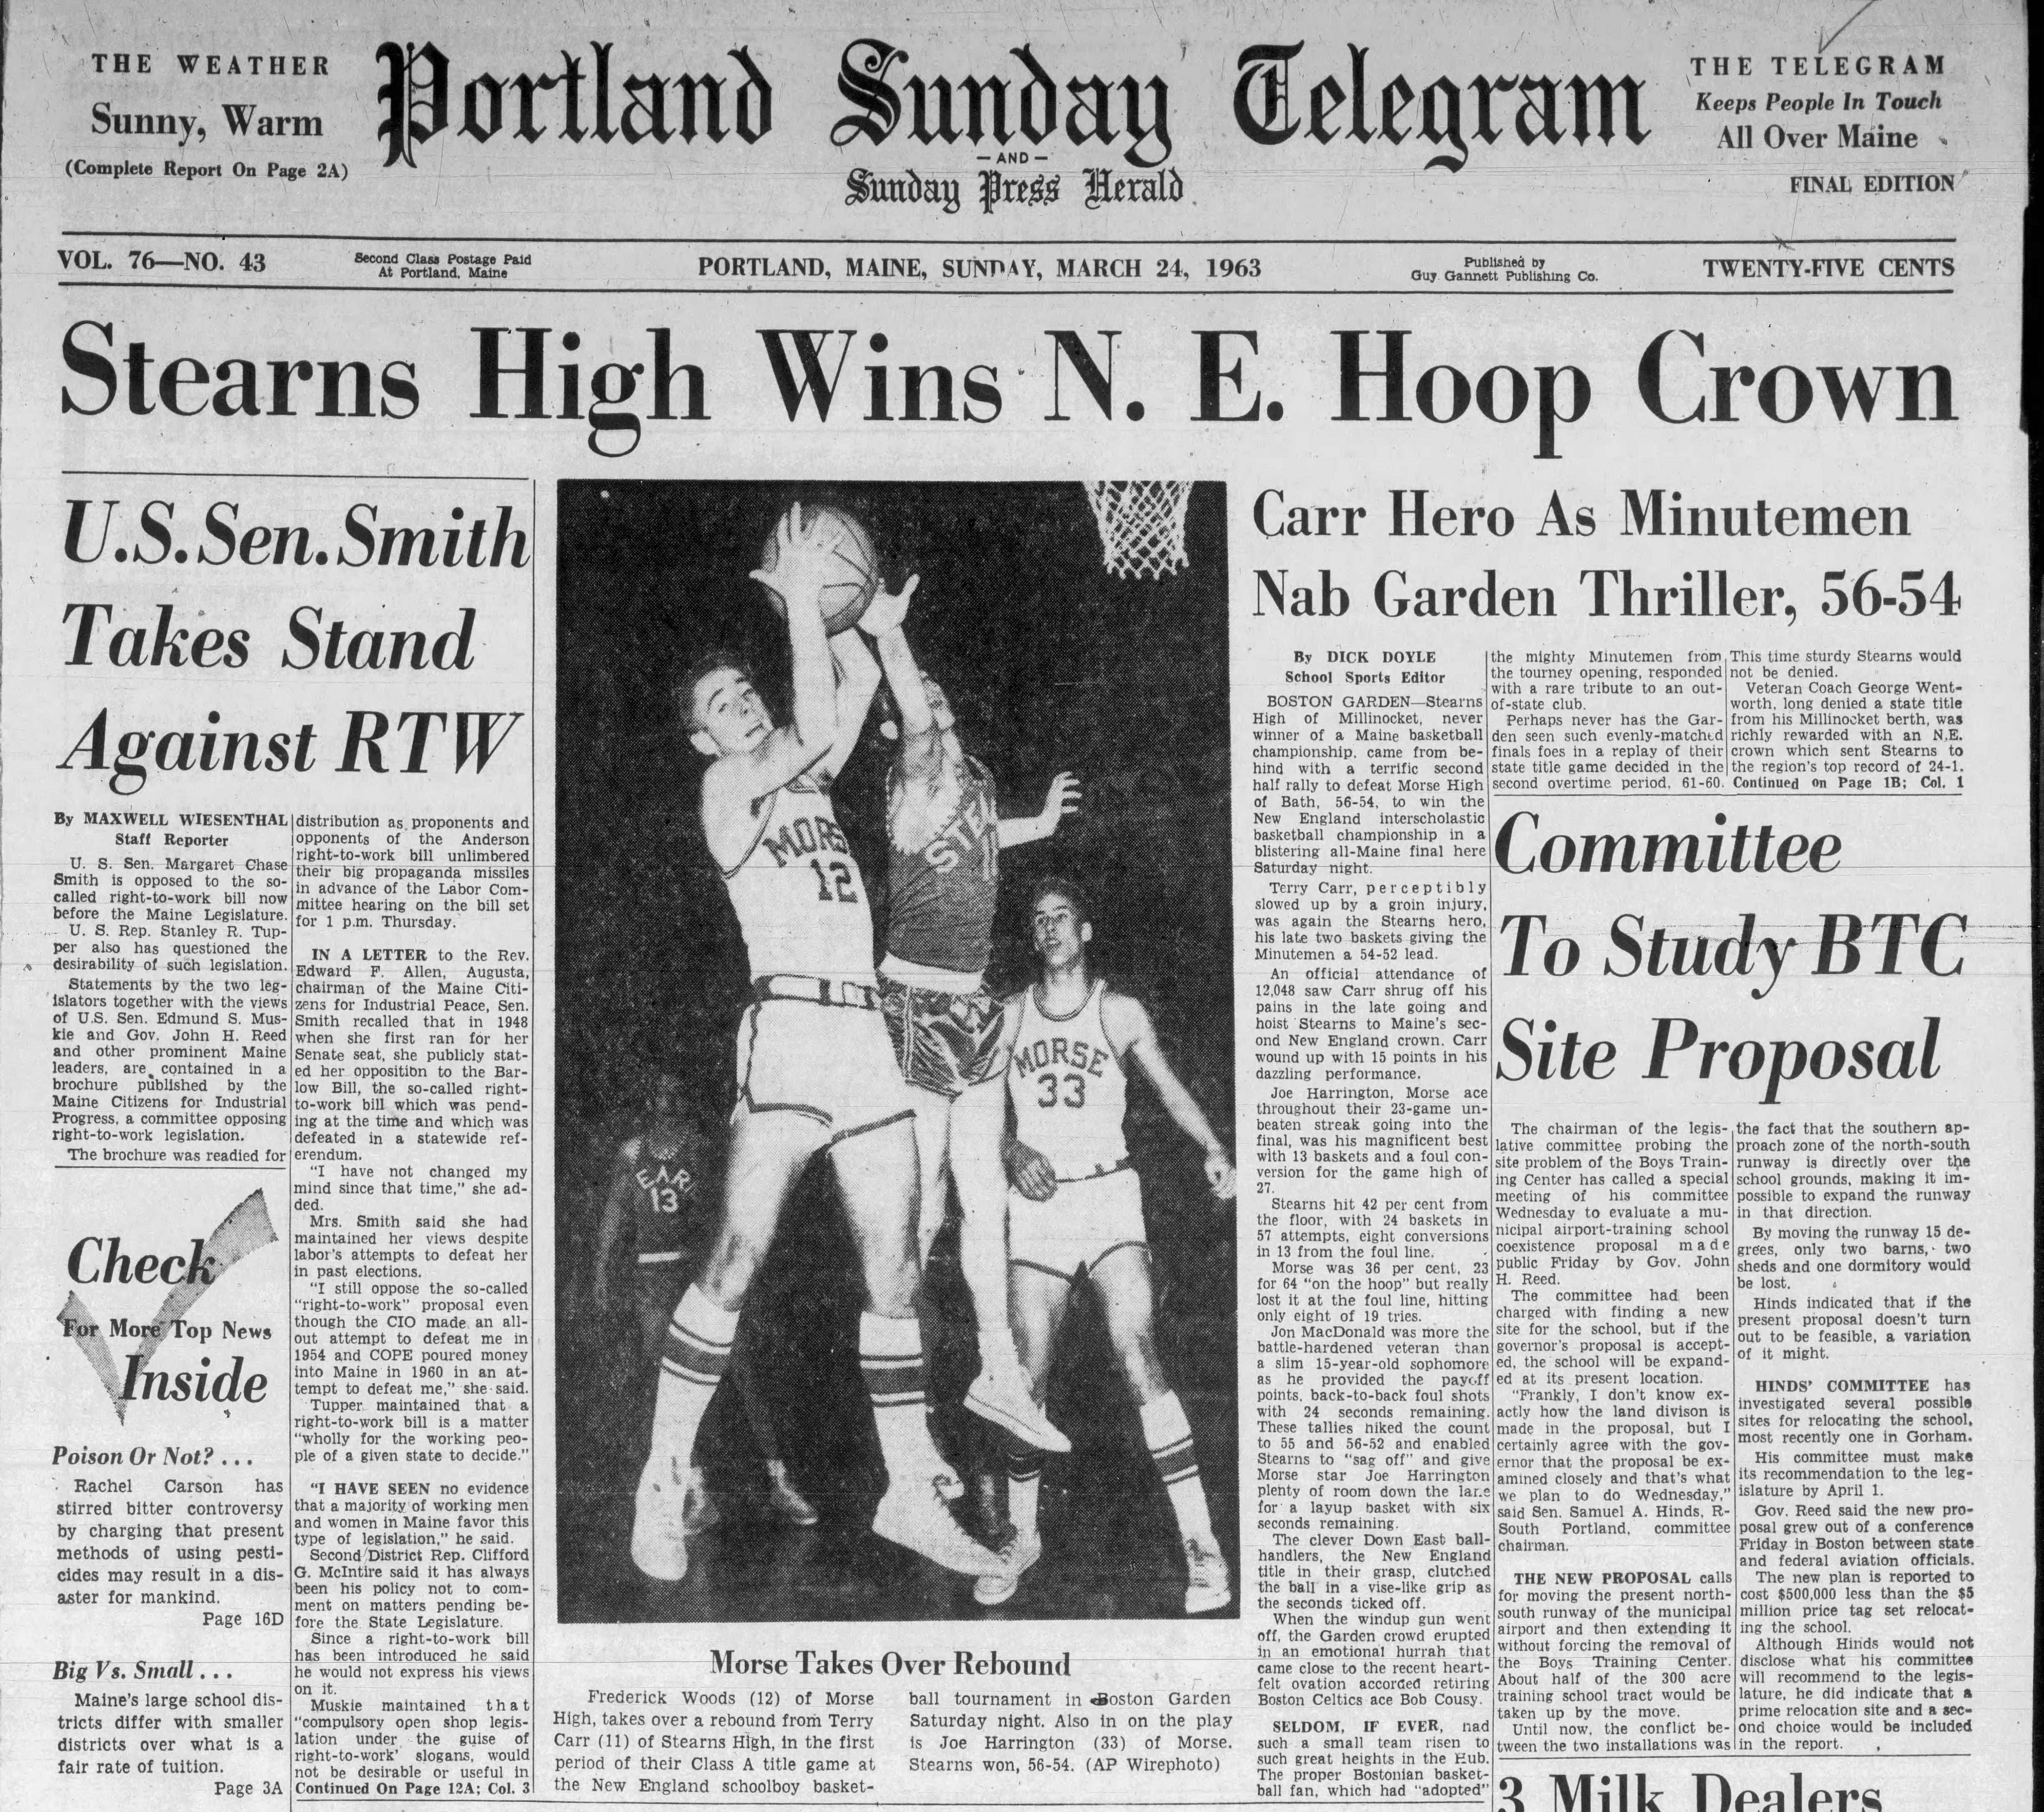 The Stearns-Millinocket battle for the New England high school basketball championship was front-page news in 1963.